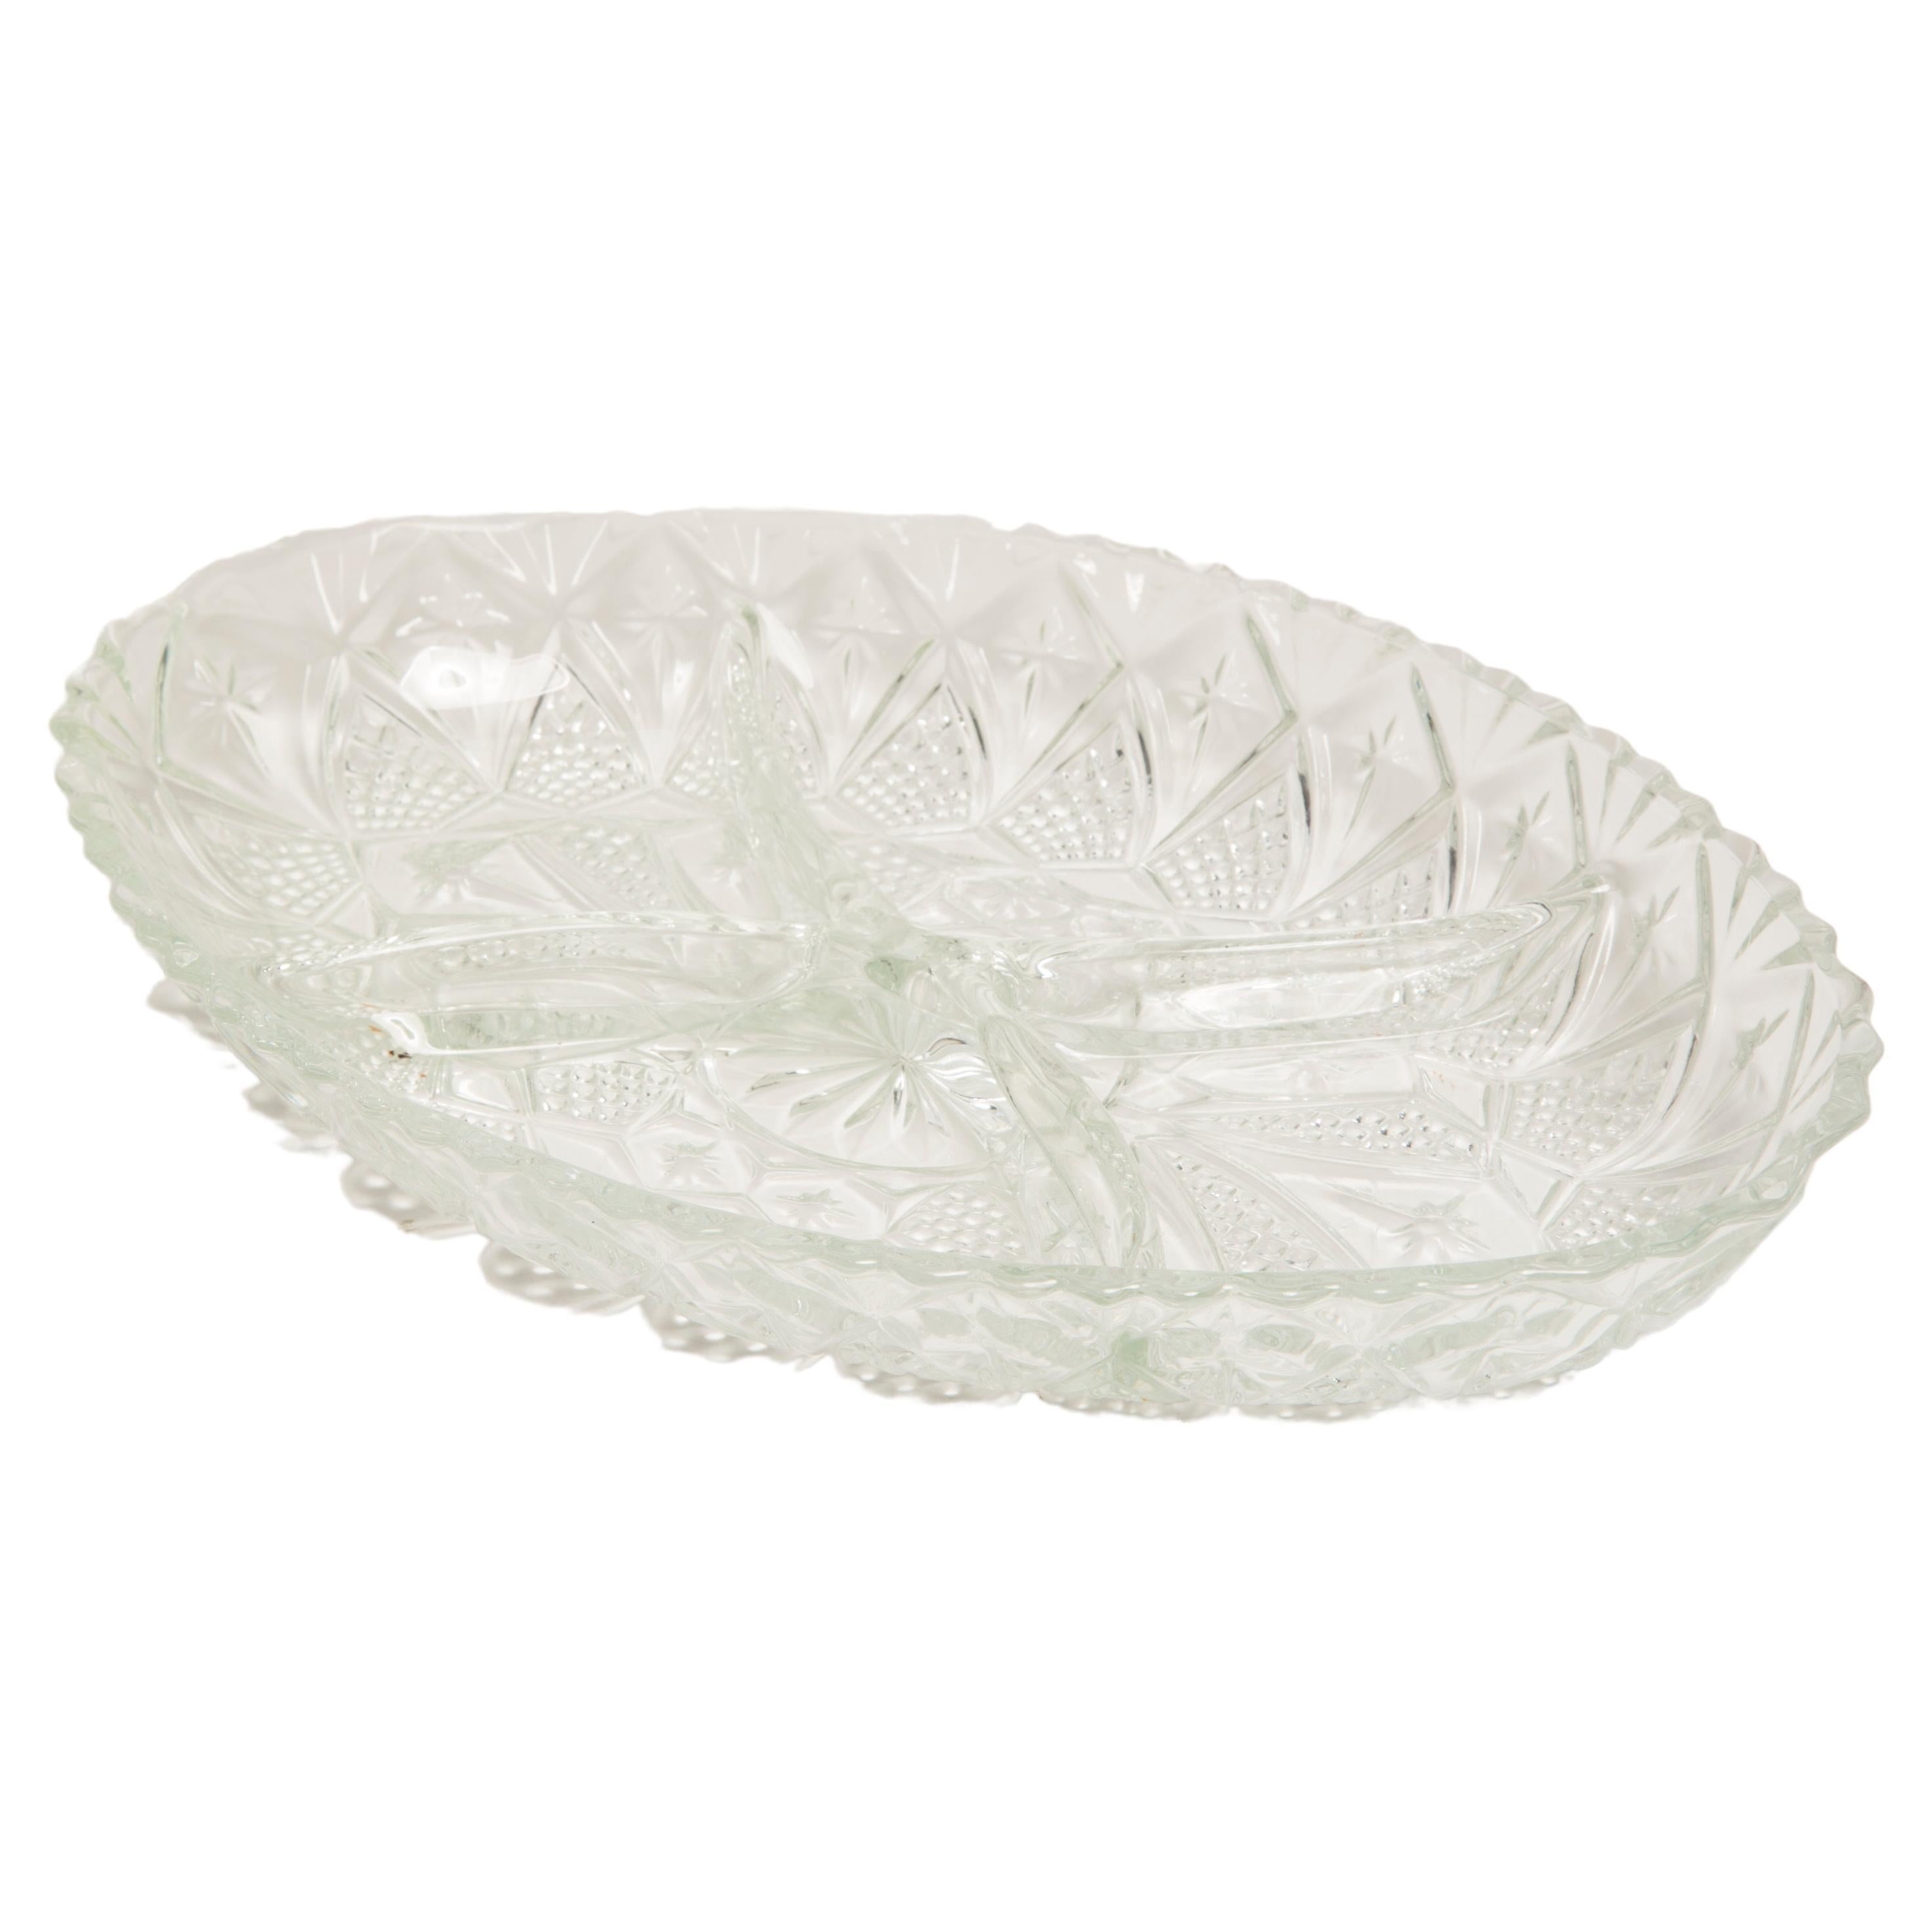 Vintage Transparent Decorative Crystal Glass Plate, Italy, 1960s For Sale